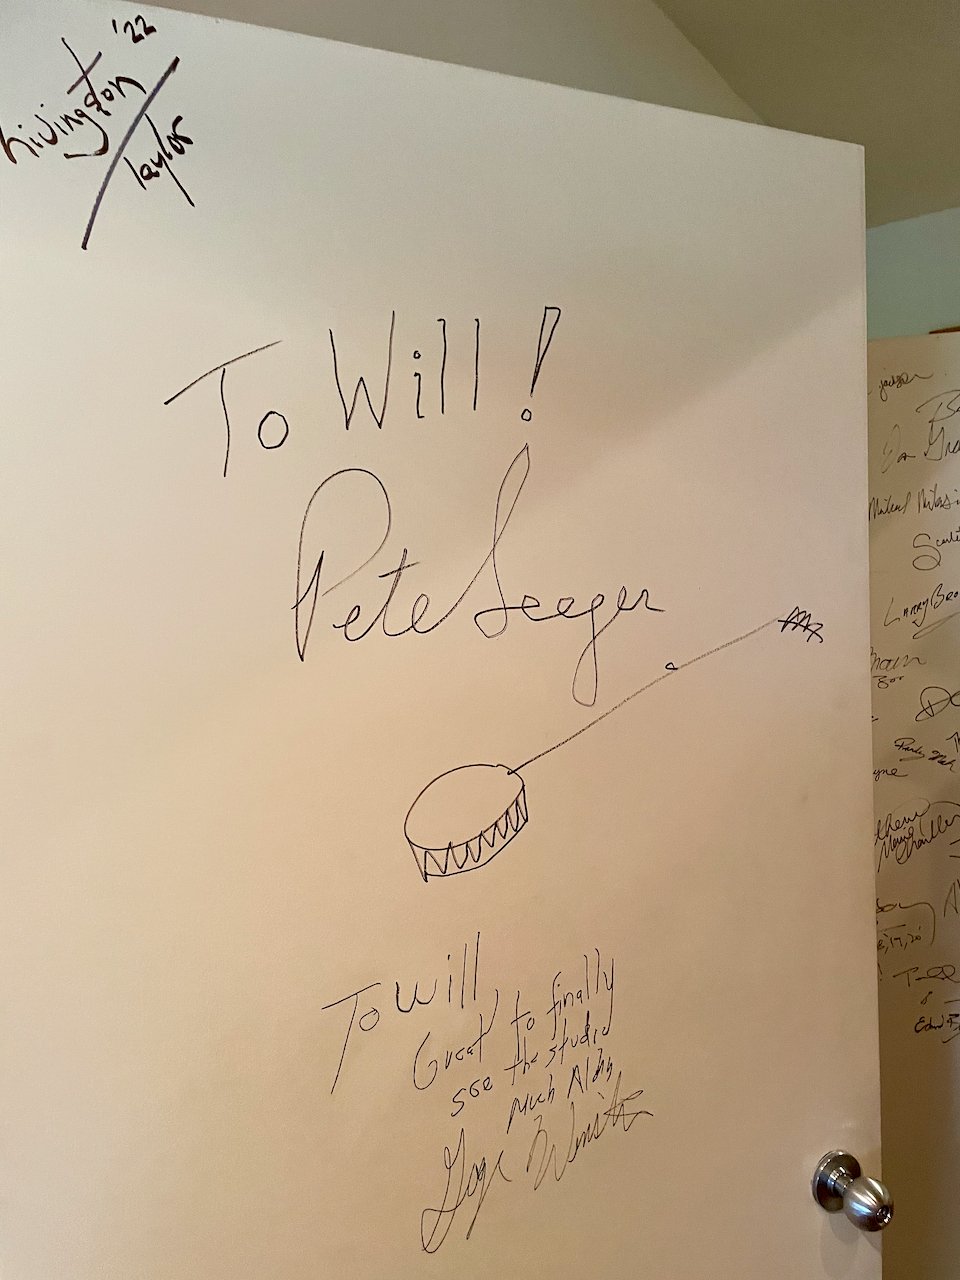  Many notable visitors have signed the studio doors, including Pete Seeger, Livingston Taylor, and George Winston. 